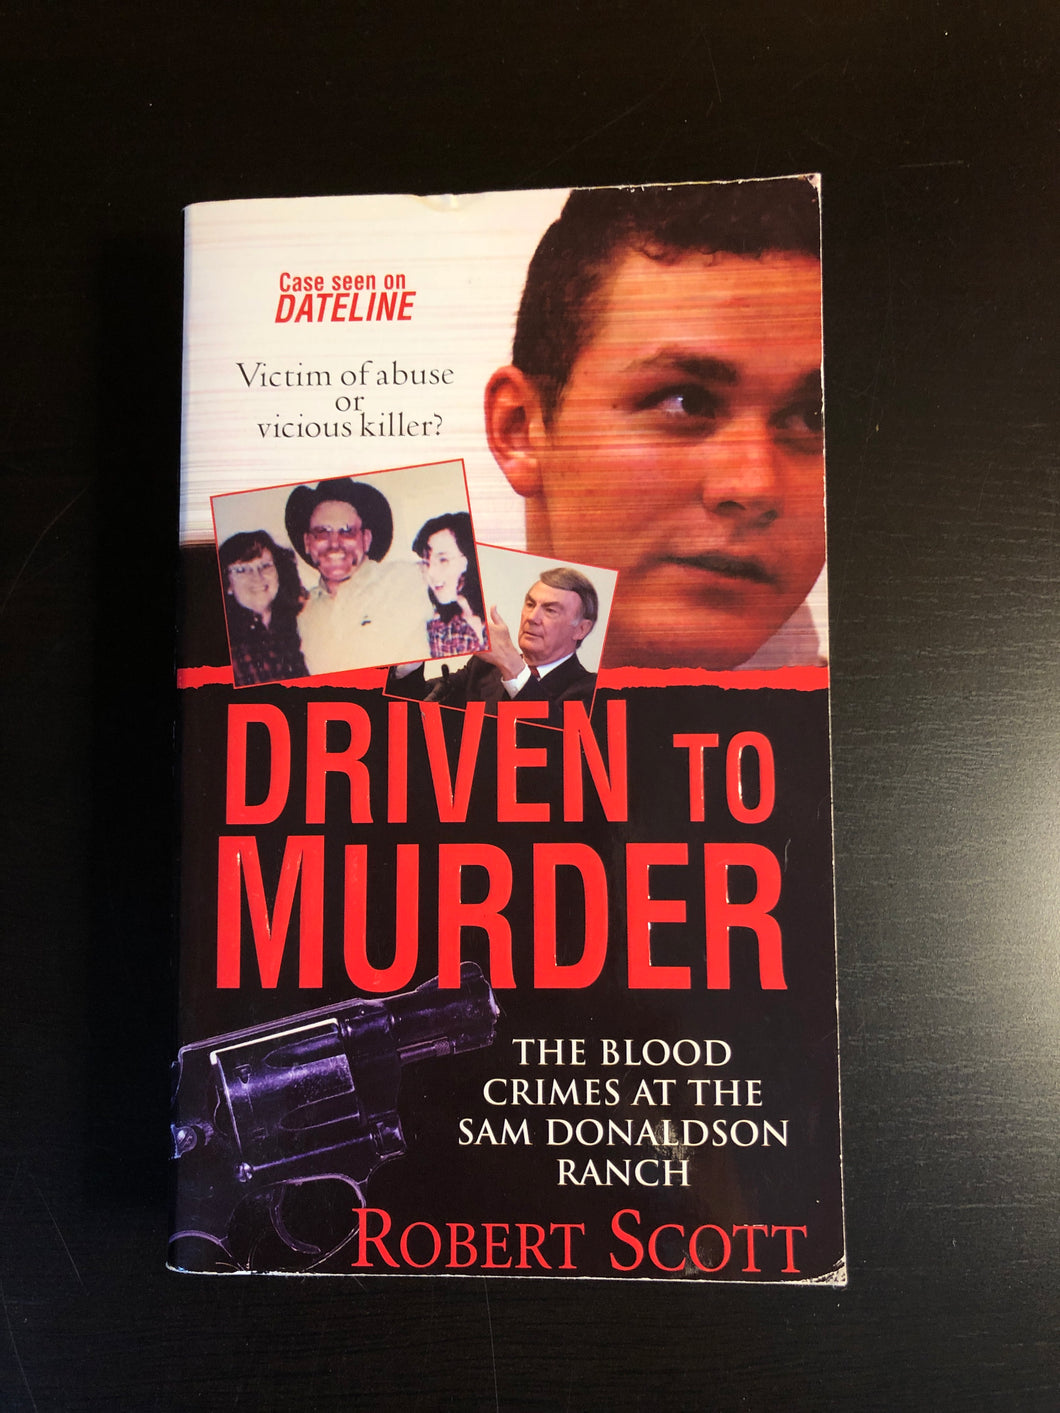 Driven to Murder: The Blood Crimes at the Sam Donaldson Ranch